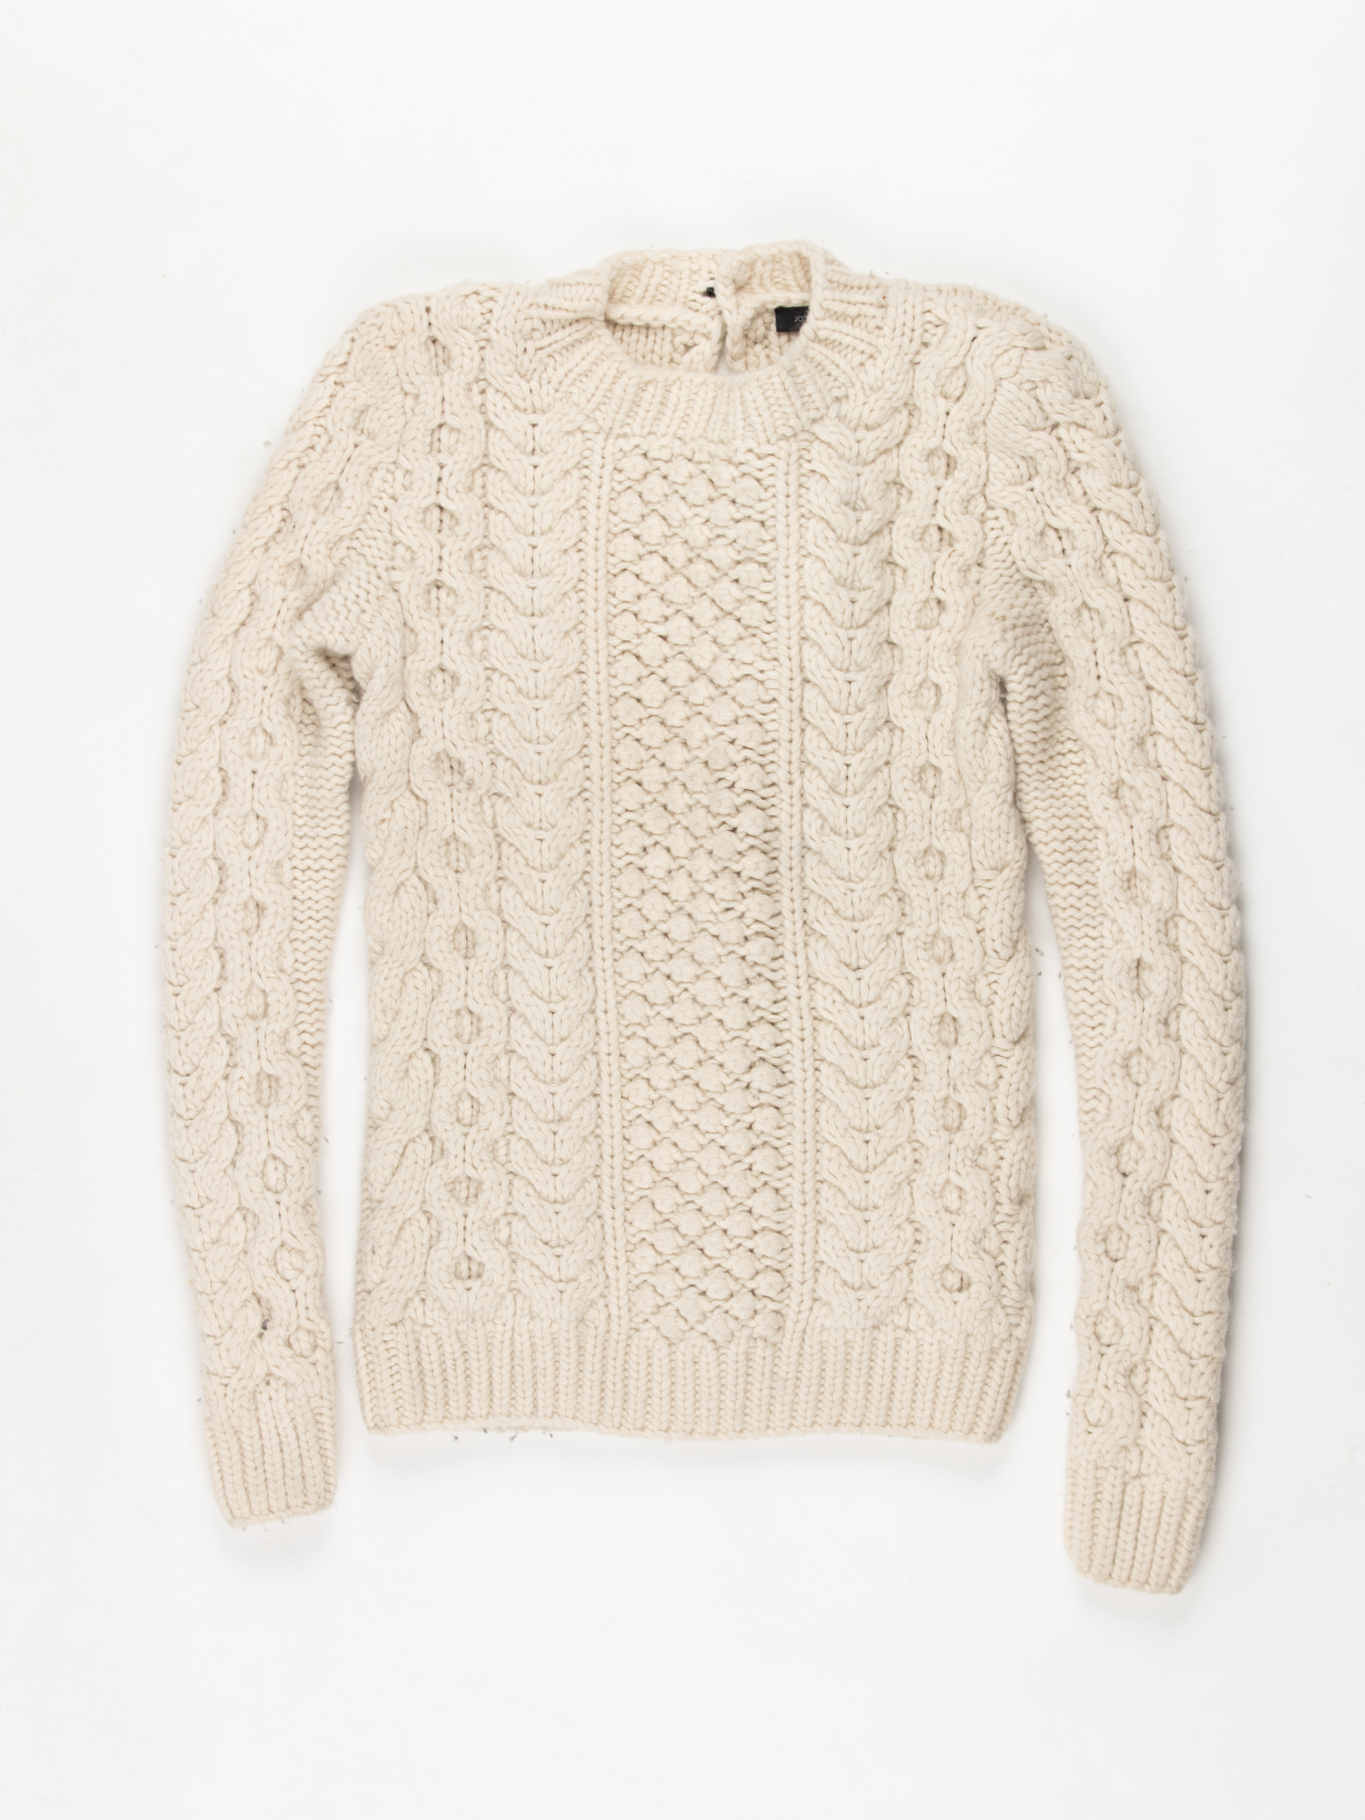 Off White Knit Sweater